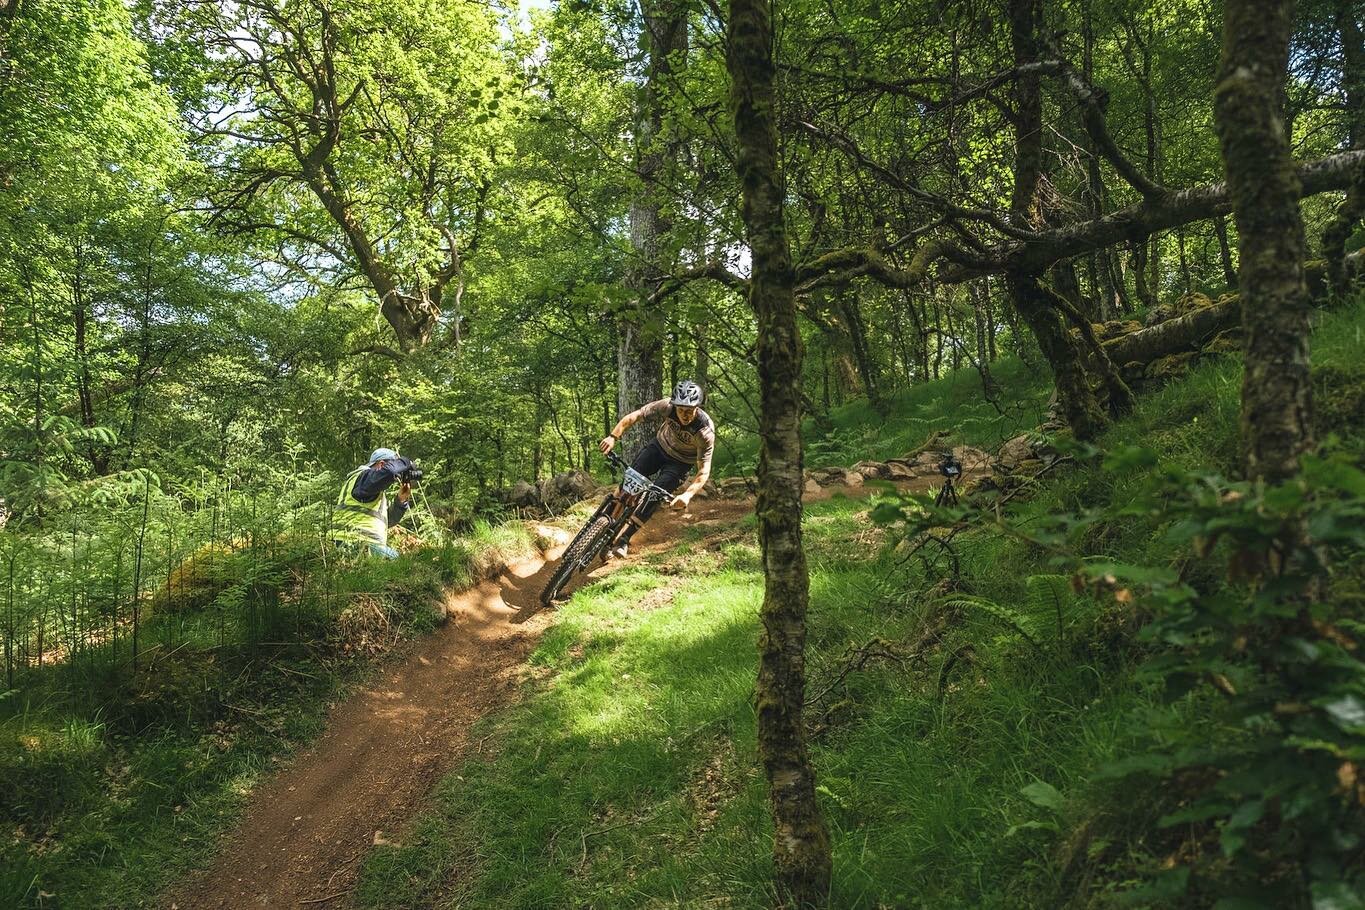 This weekend is the 10th anniversary of The Dunkeld Enduro - an independent mountain biking race showcasing some of the fantastic riding in the area. 

Join us in the gardens for live music, food, drinks and medal podiums from 12pm on Saturday and Su